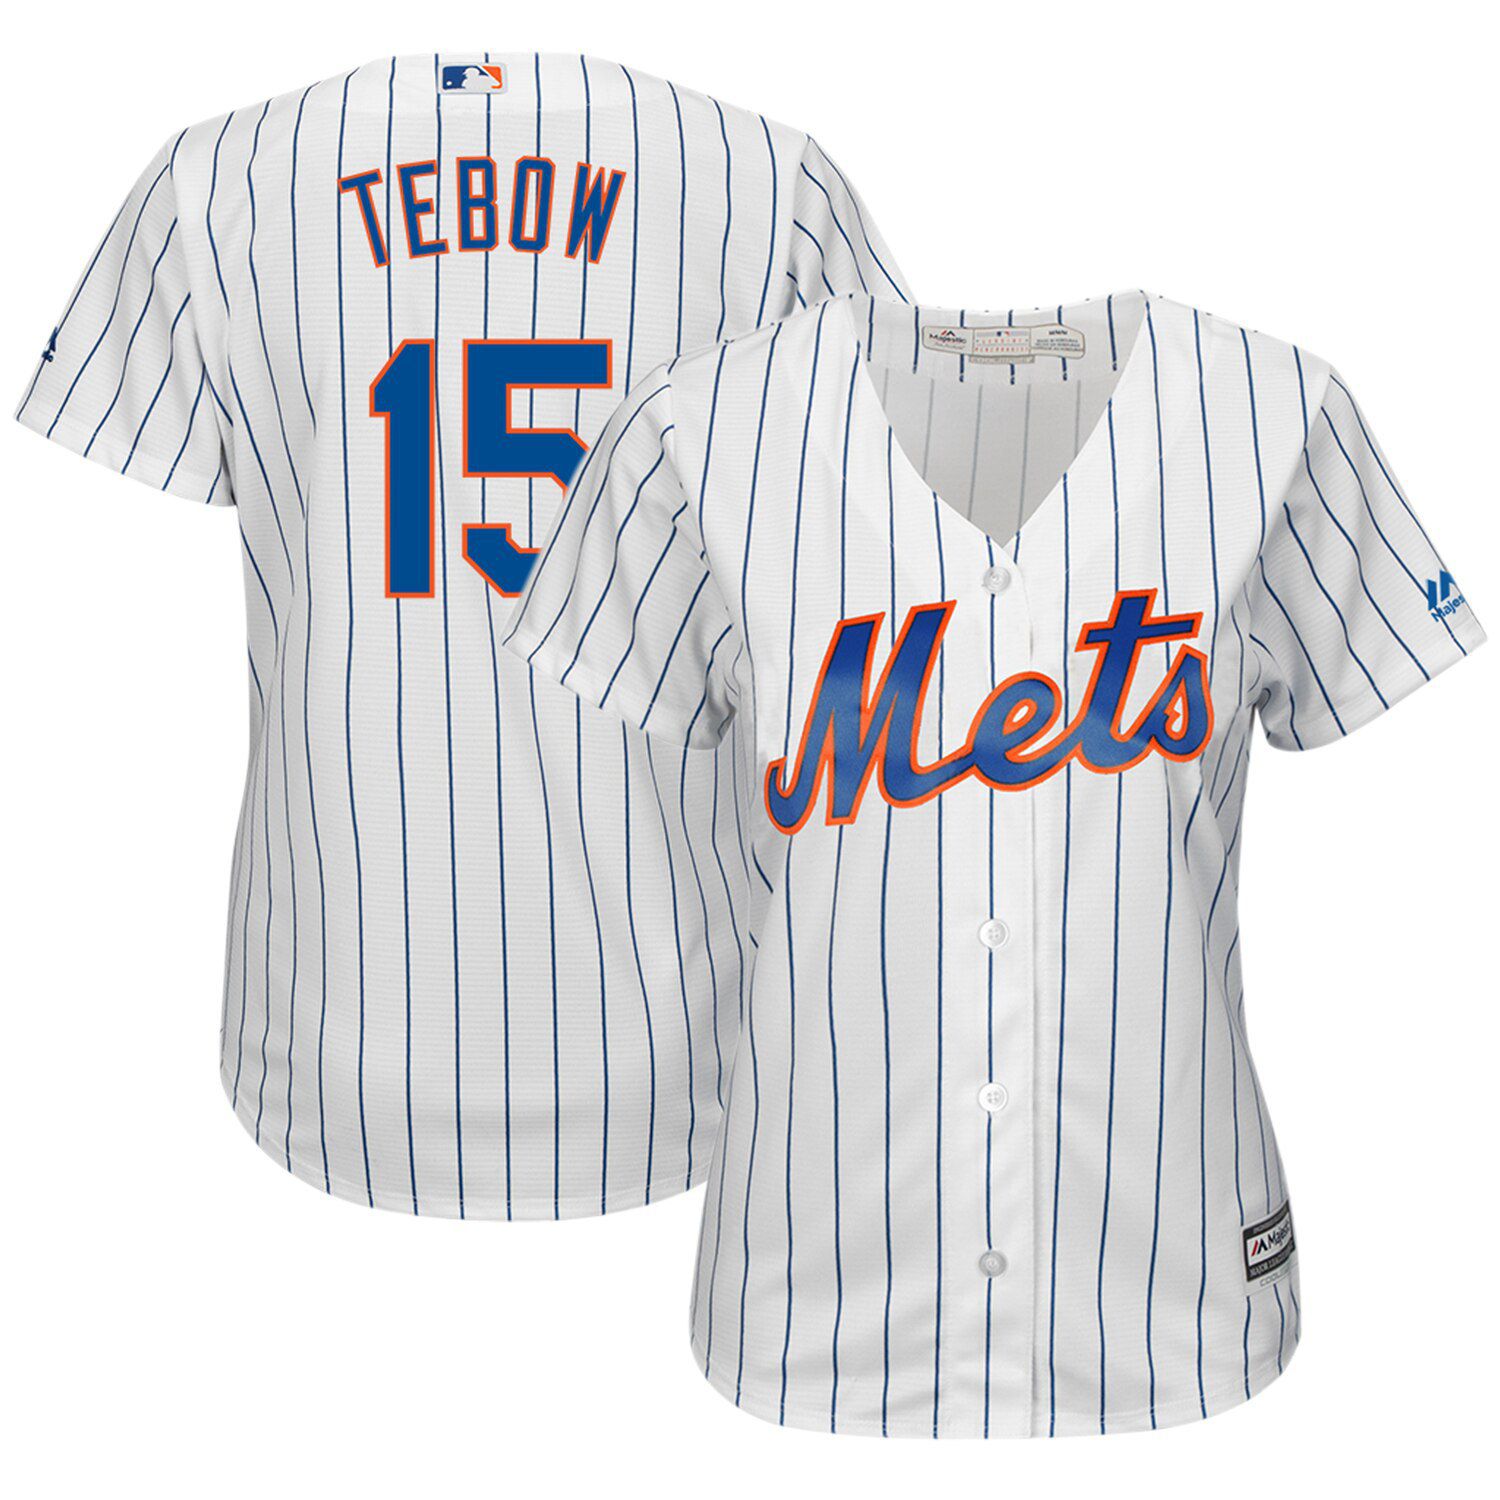 tebow mets jersey